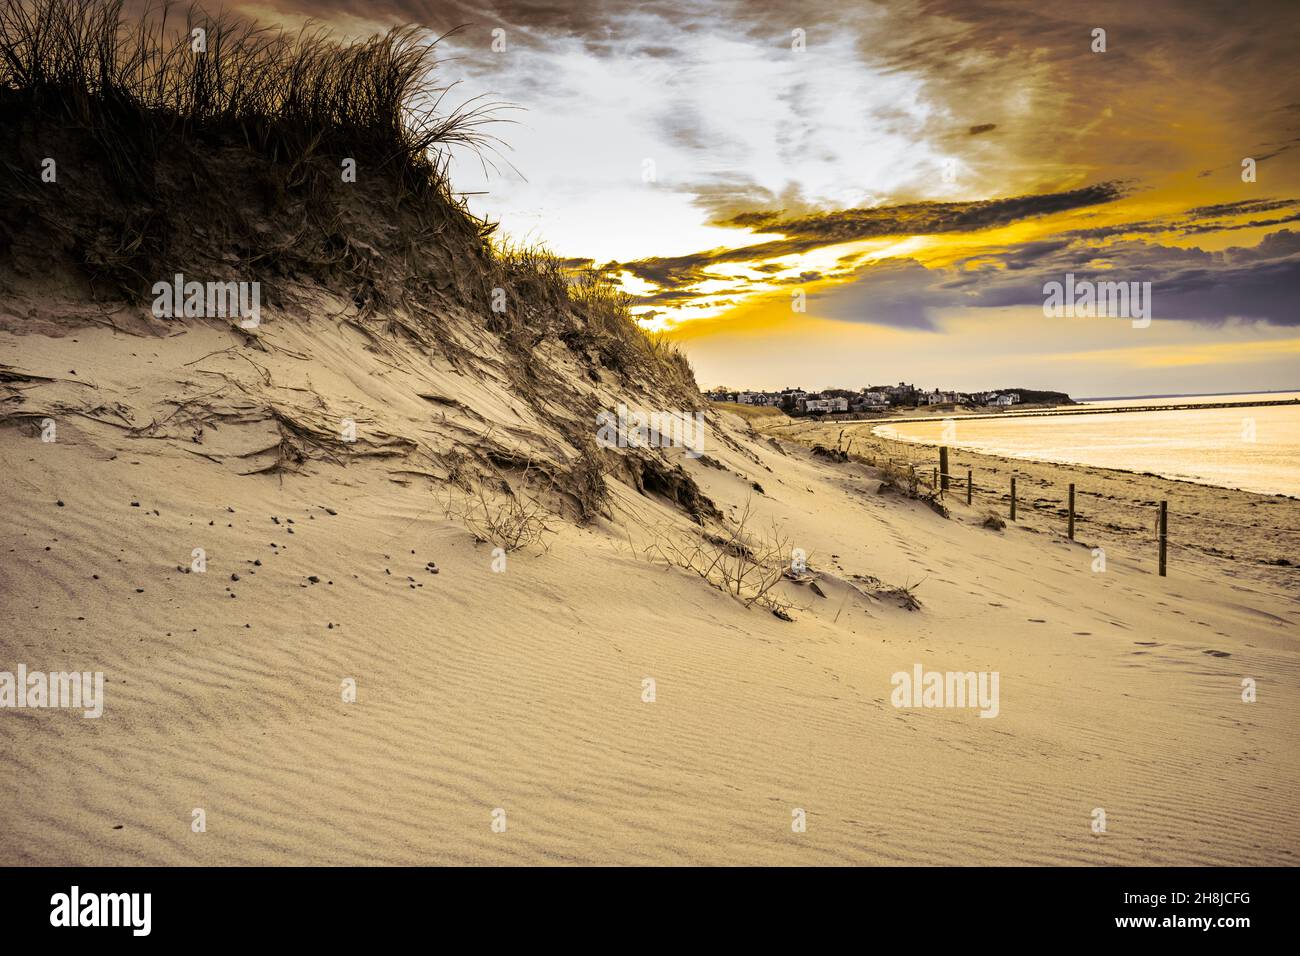 Nature created these beautiful, dramatic storm clouds.  However, the upcoming storm is going to cause additional erosion to the sand dunes. Stock Photo